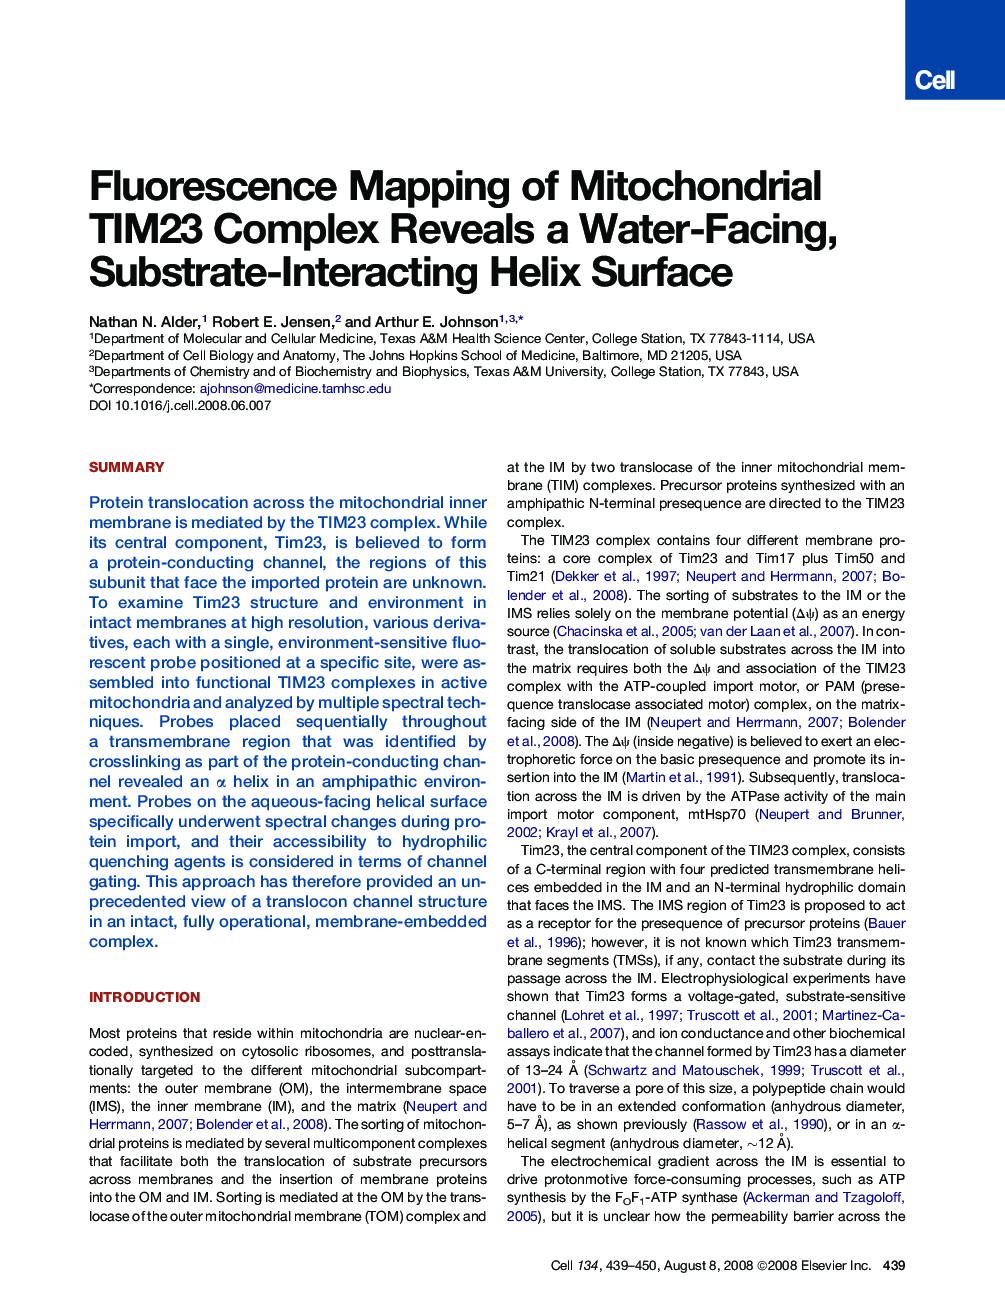 Fluorescence Mapping of Mitochondrial TIM23 Complex Reveals a Water-Facing, Substrate-Interacting Helix Surface